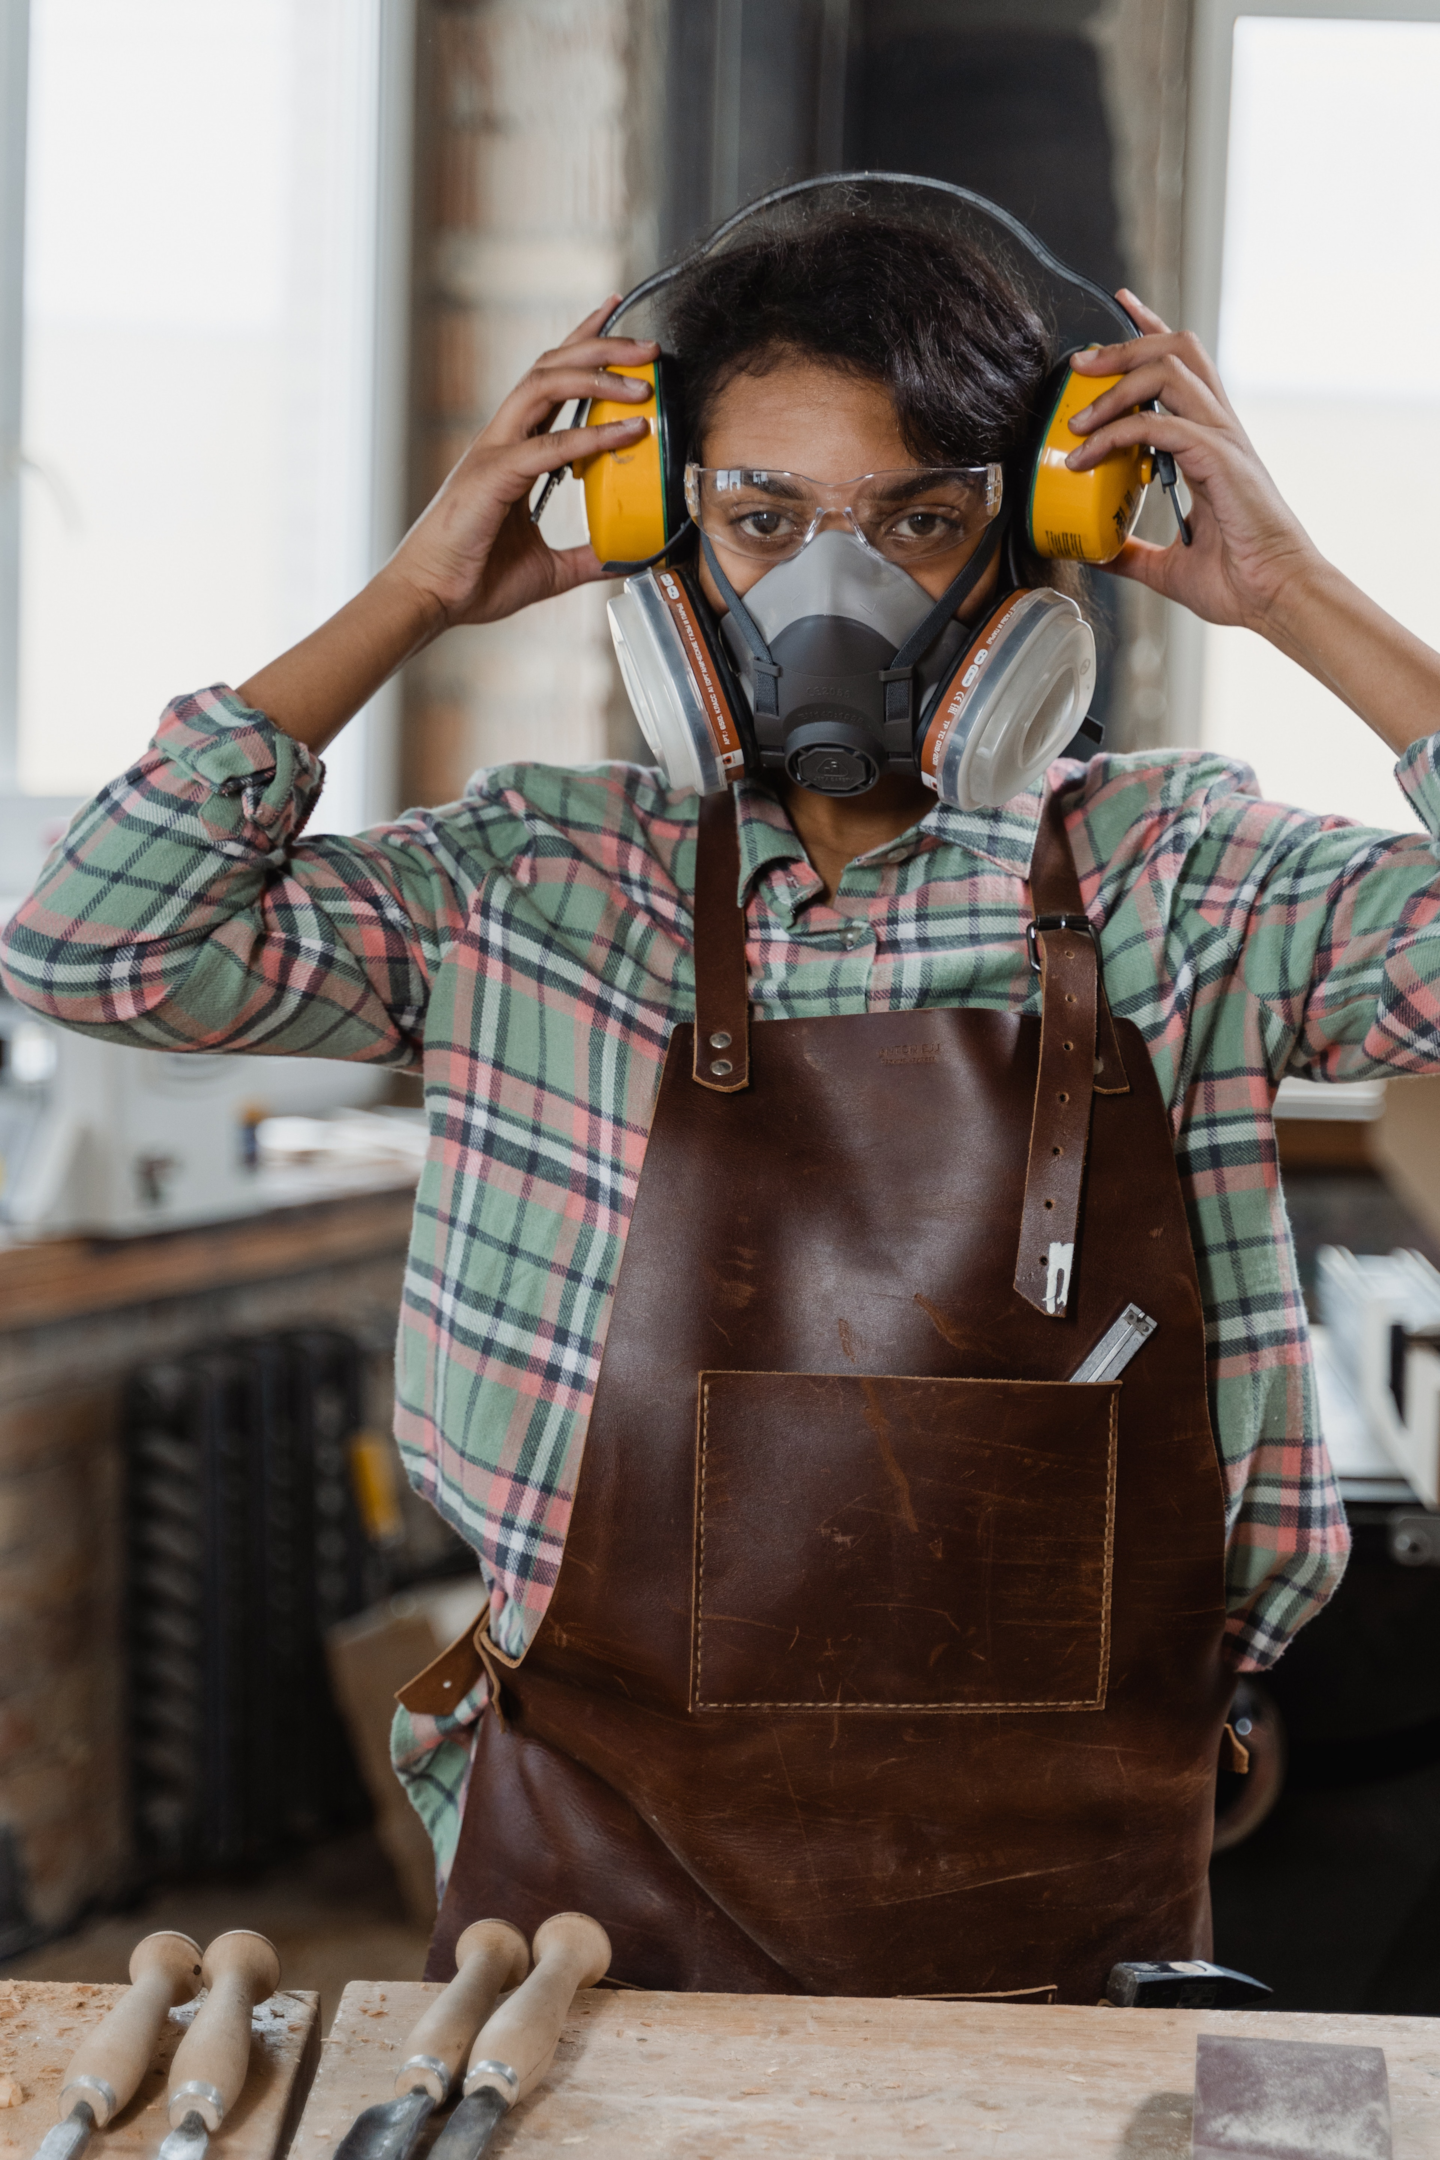 person working on wood projects wearing a respirator